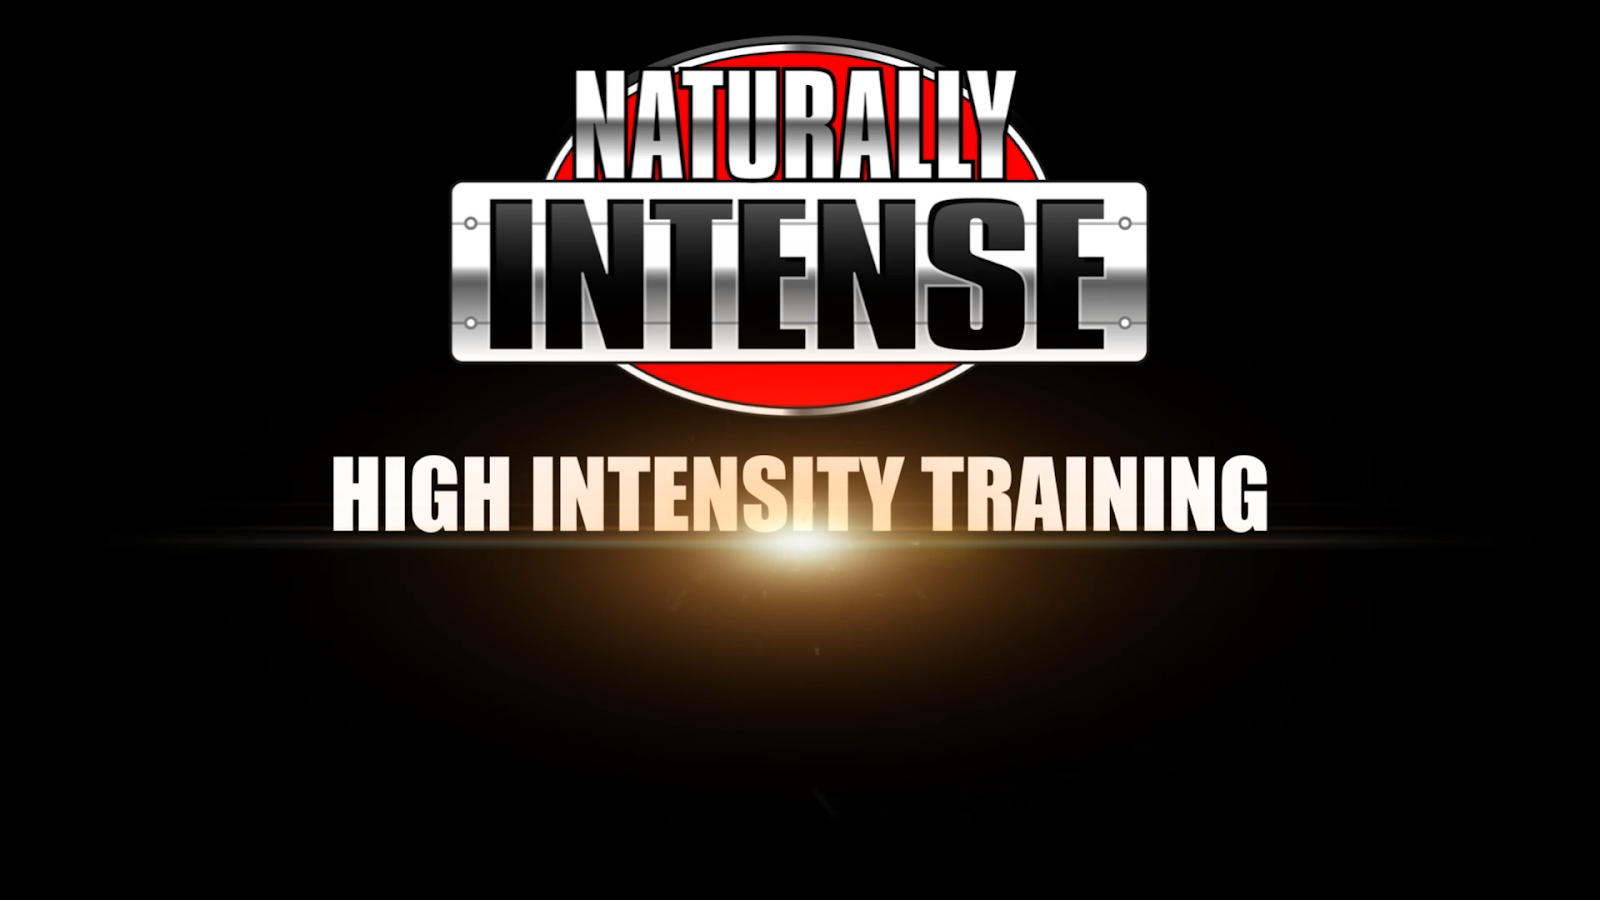 Every Naturally Intense High Intensity Workout is different!